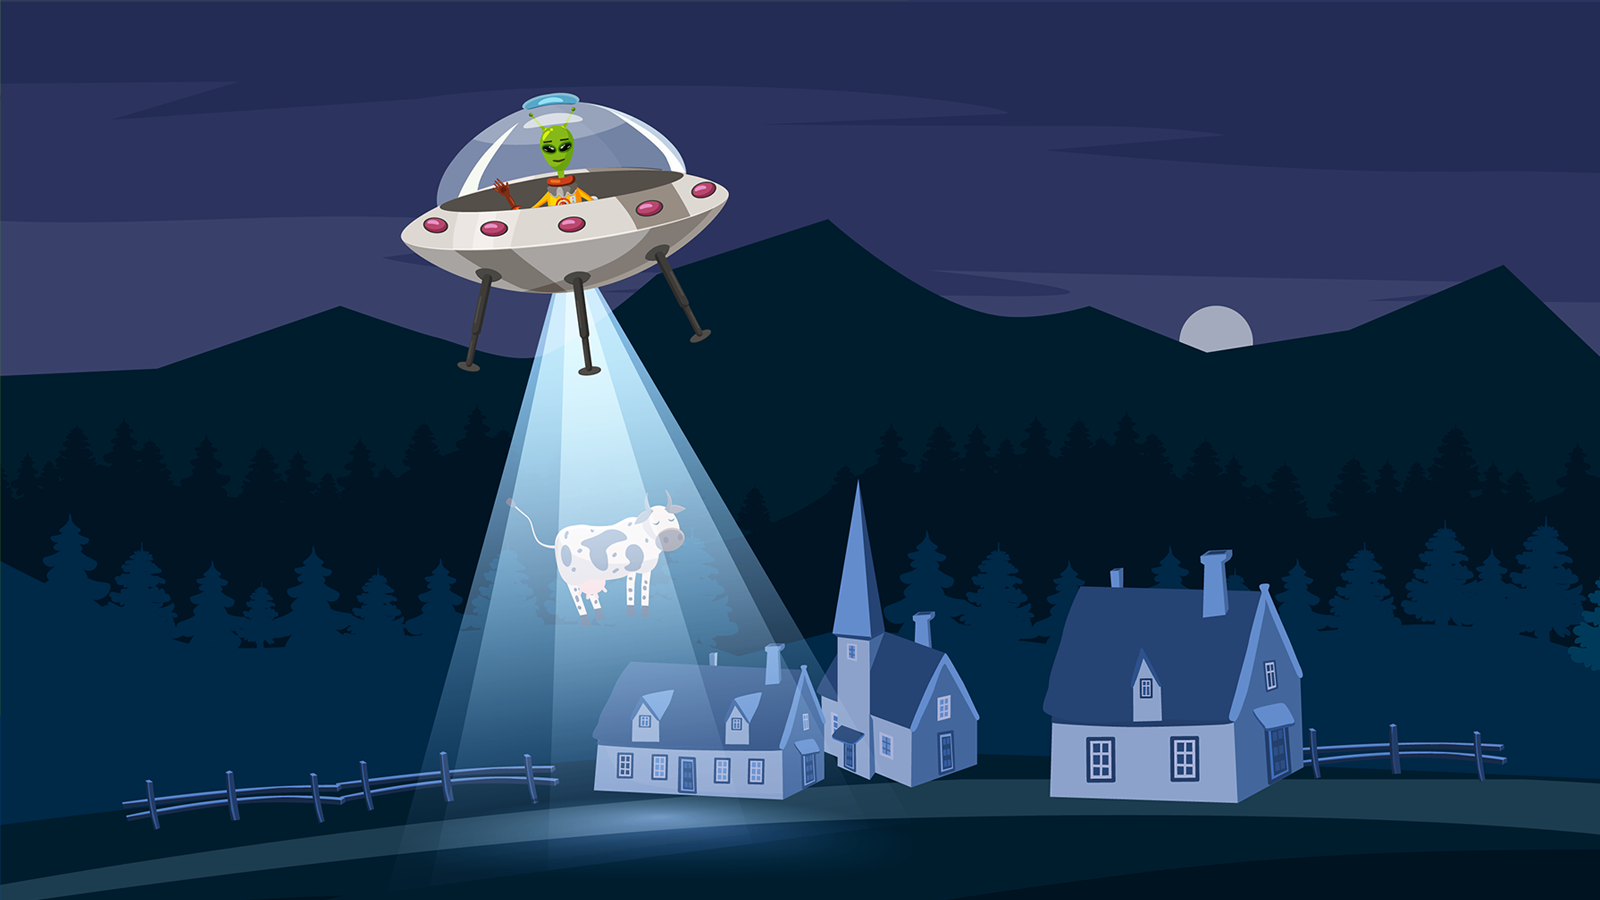 Spacecraft hit your home? Most insurance covers that.